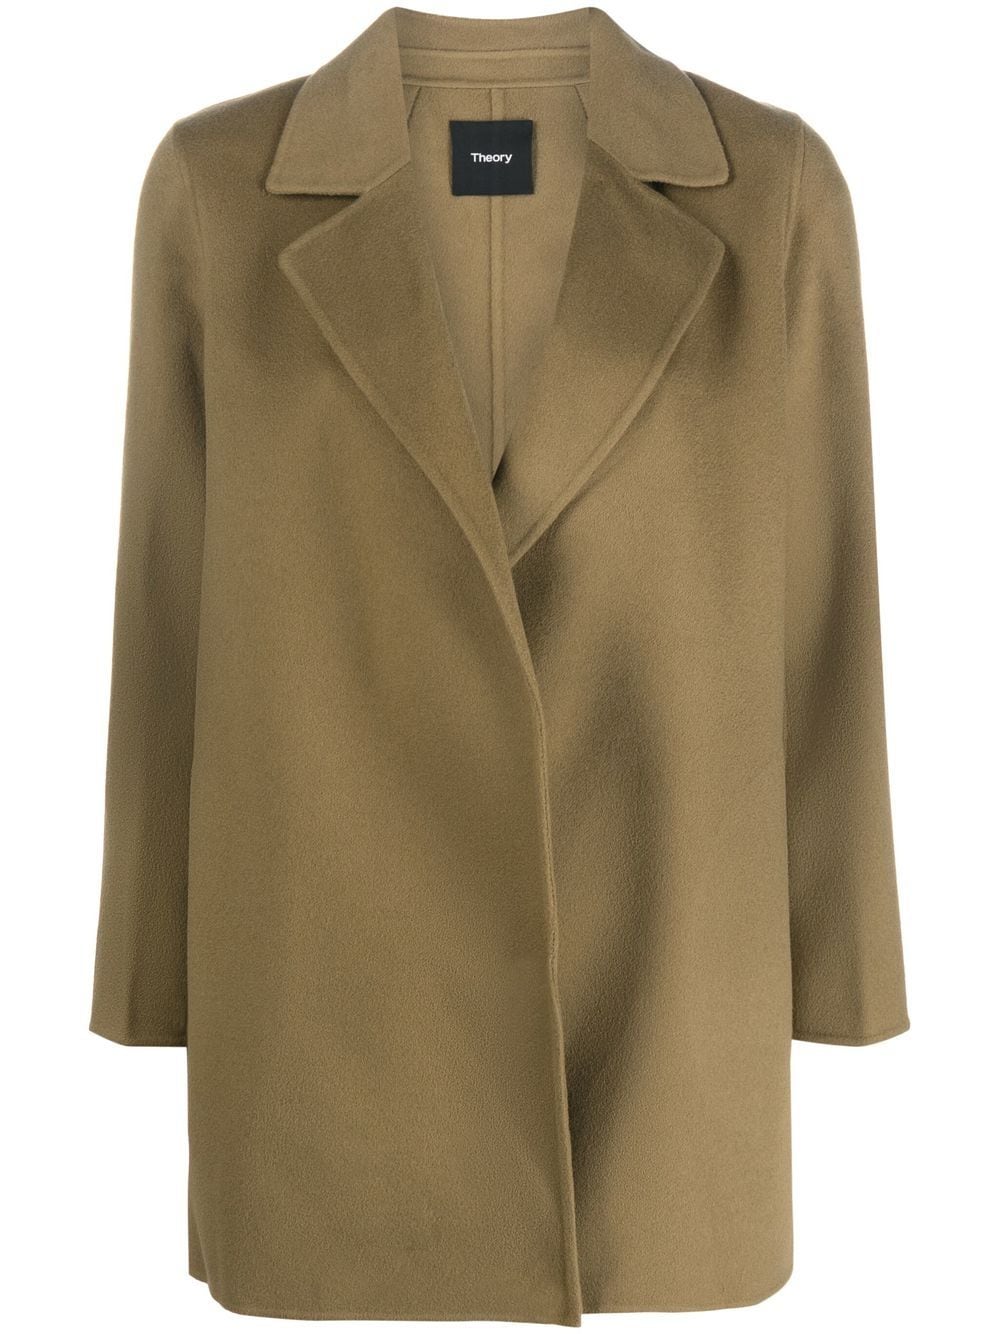 Theory off-centre Fastening Coat - Farfetch